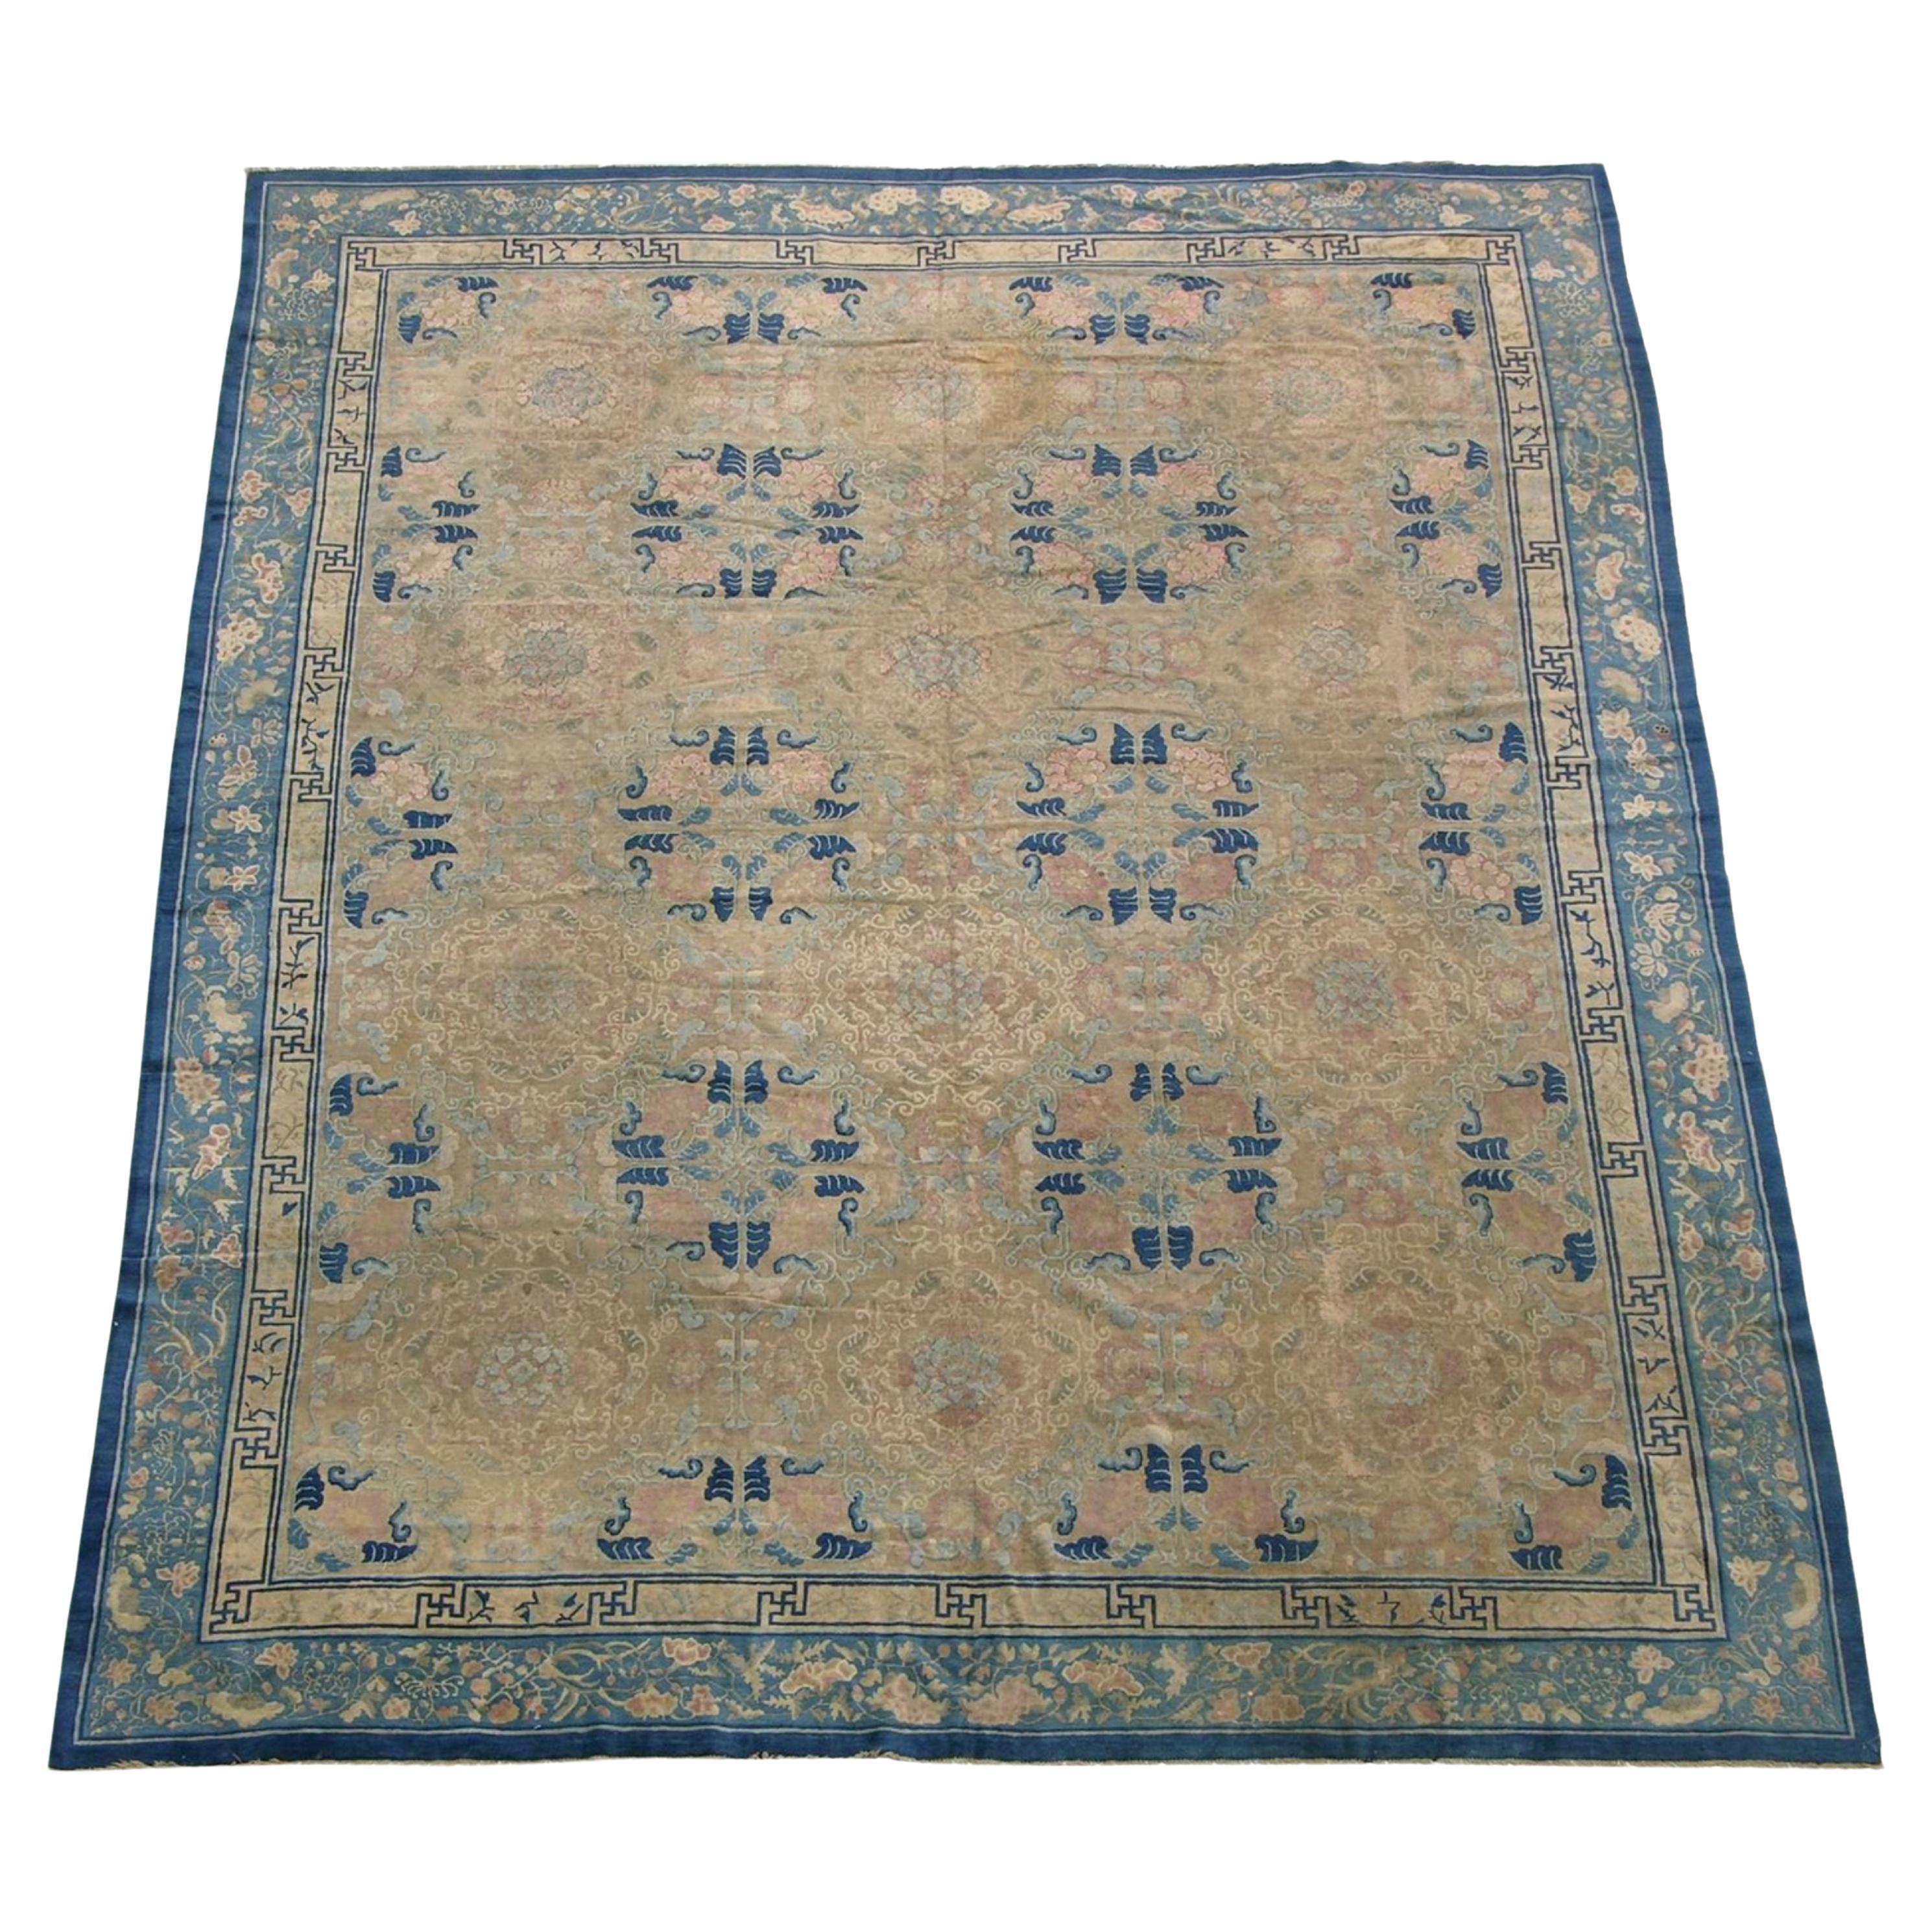 1900 Fine Antique Chinese Rug